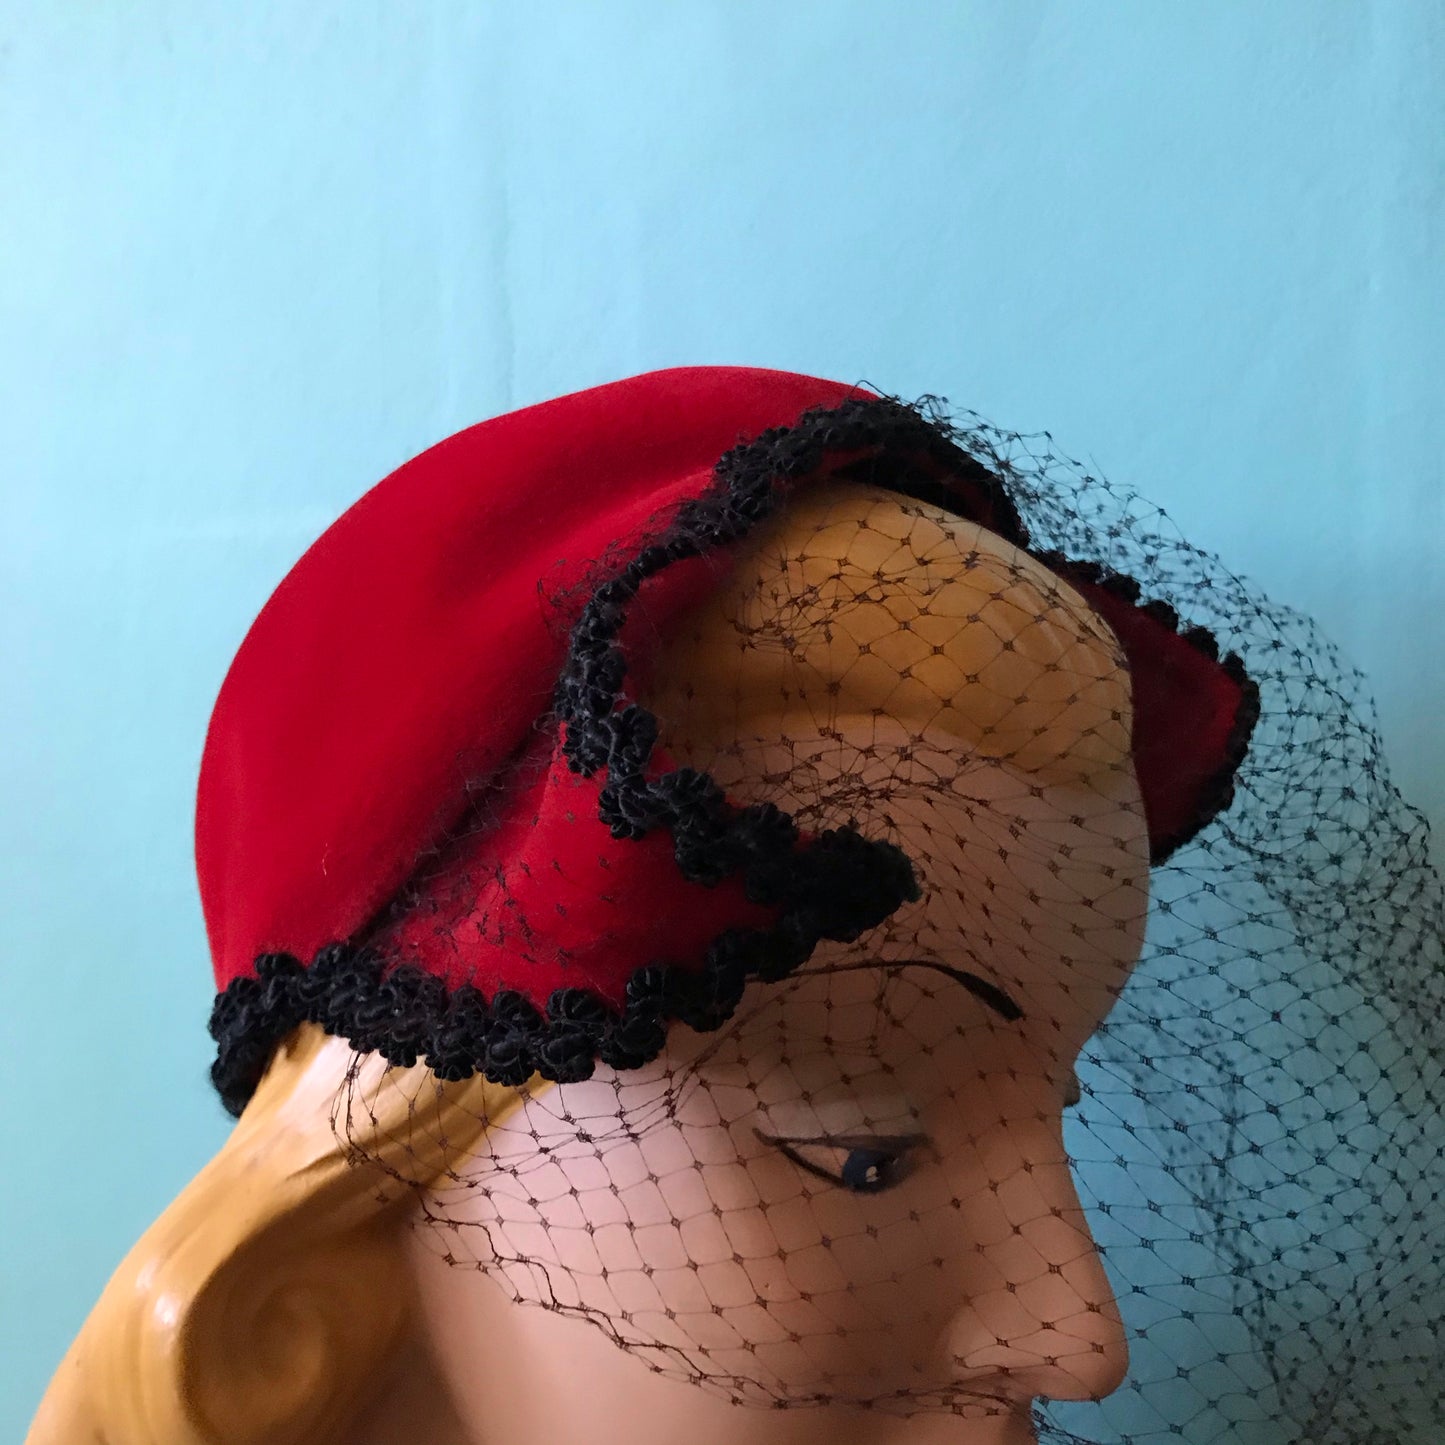 Molten Red Curled Devil Horn Veiled Cocktail Hat circa 1950s